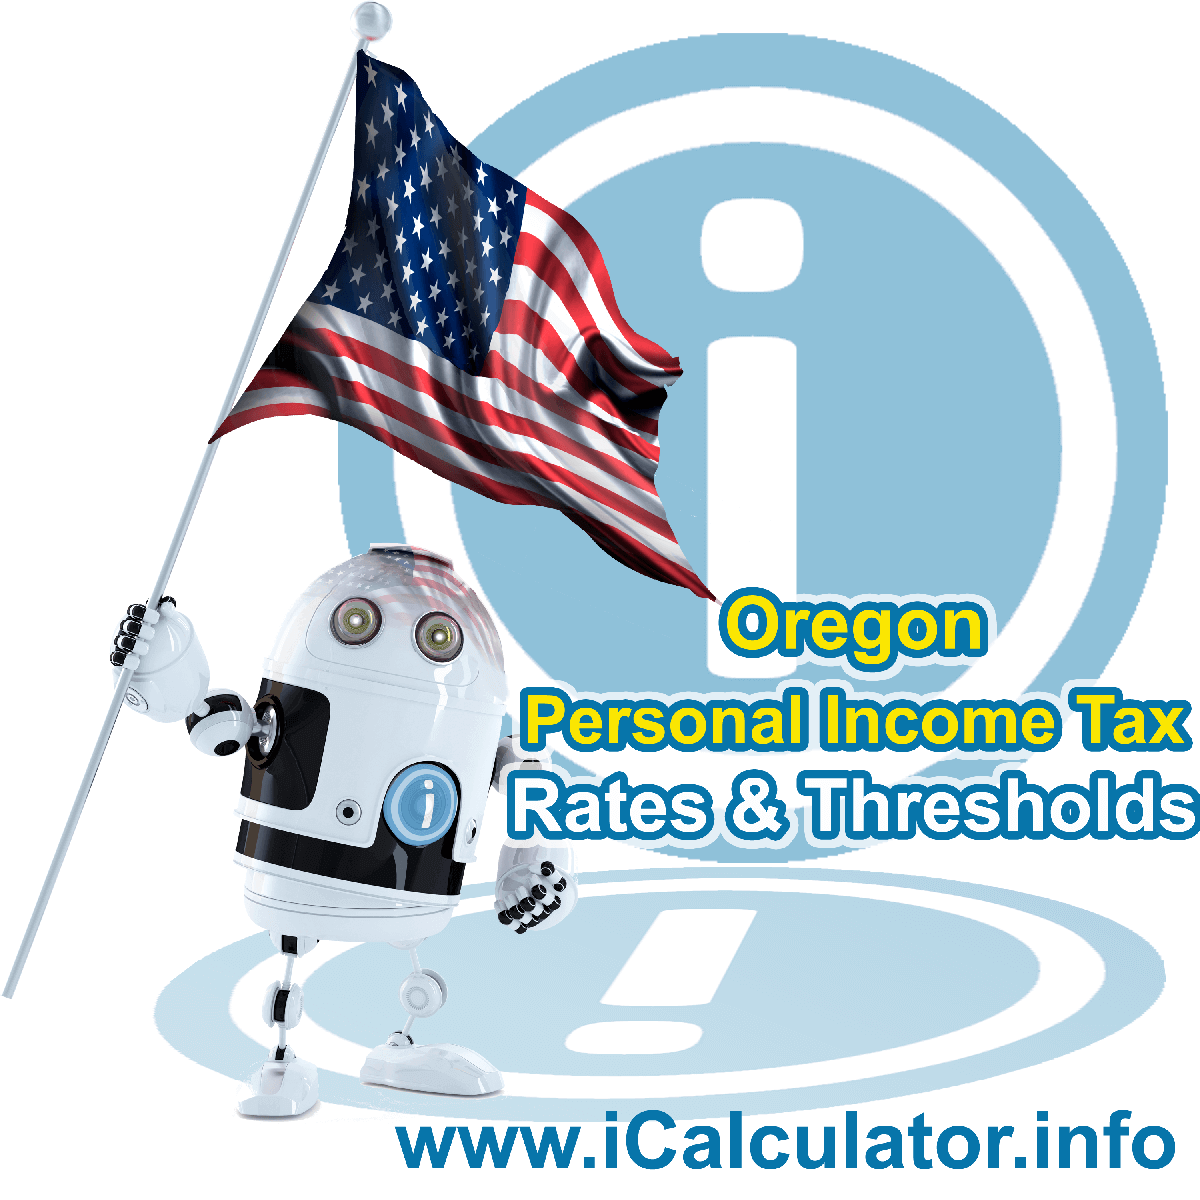 Oregon State Tax Tables 2023. This image displays details of the Oregon State Tax Tables for the 2023 tax return year which is provided in support of the 2023 US Tax Calculator